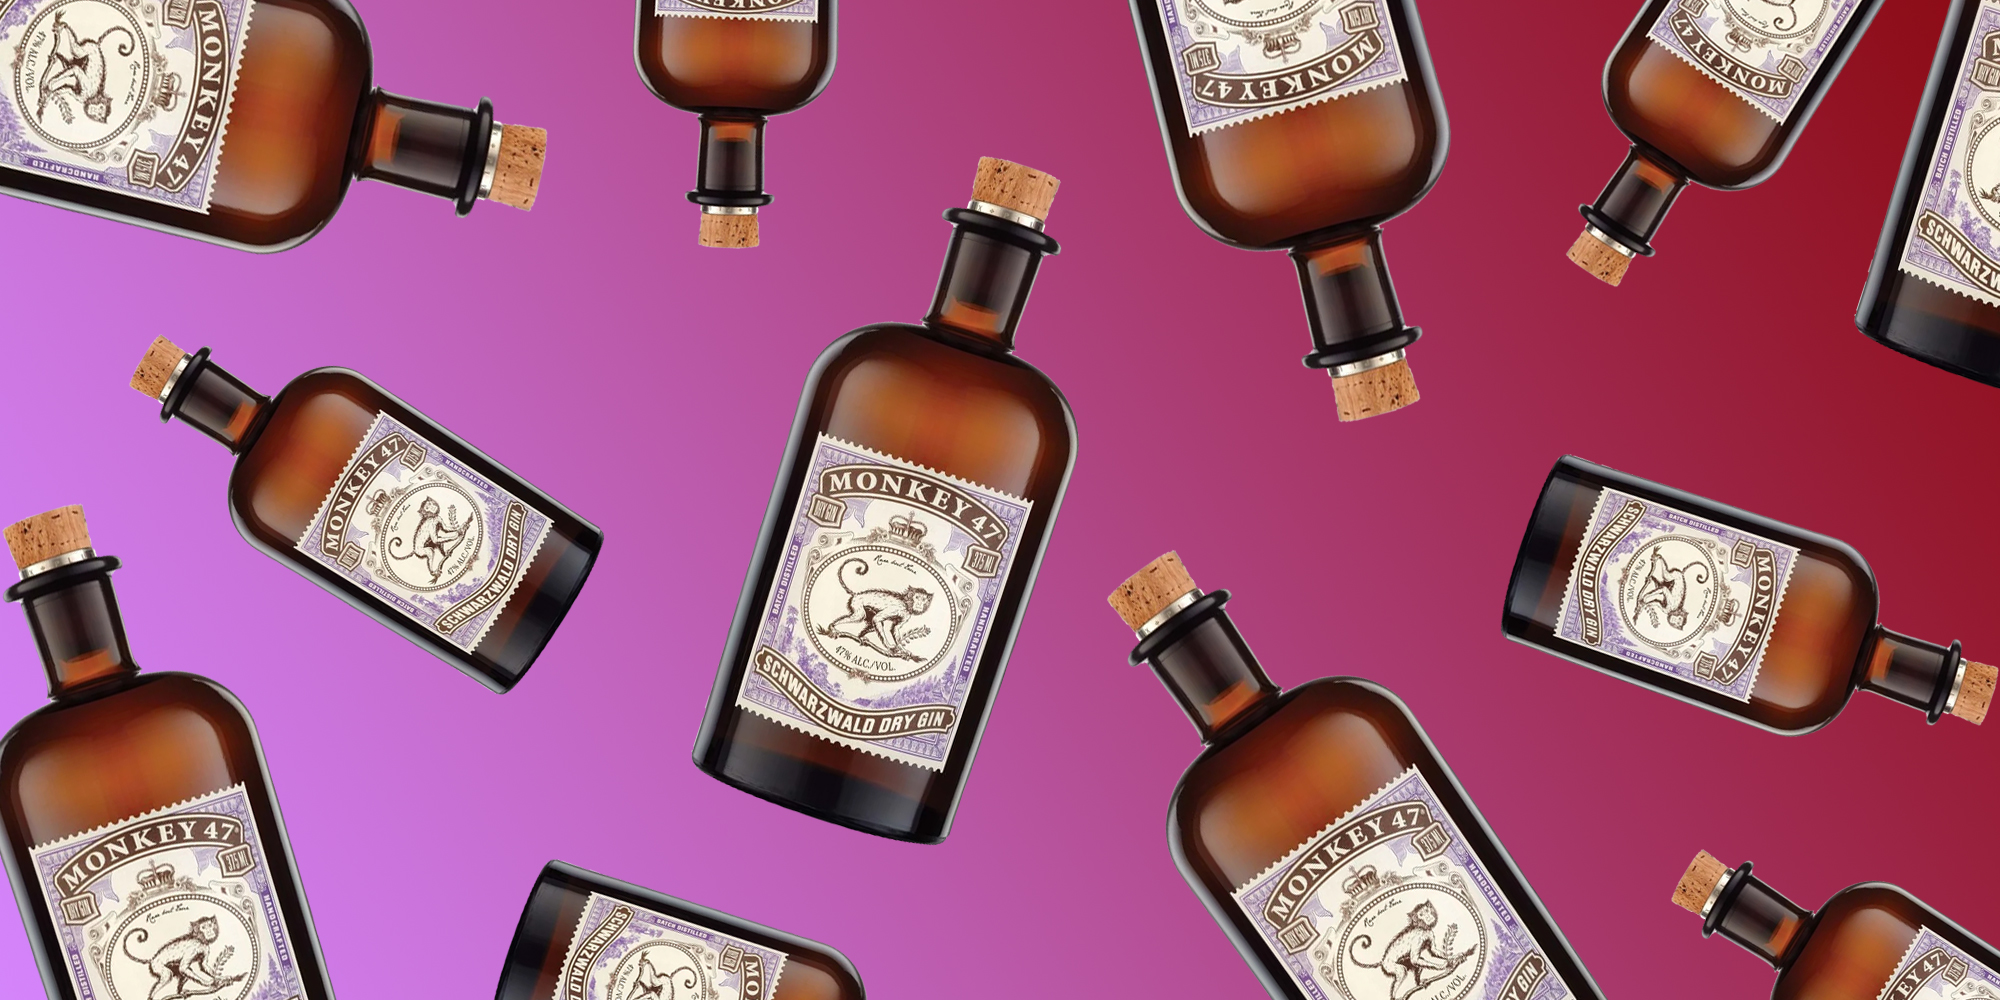 10 Things You Should Know About Monkey 47 Gin | VinePair